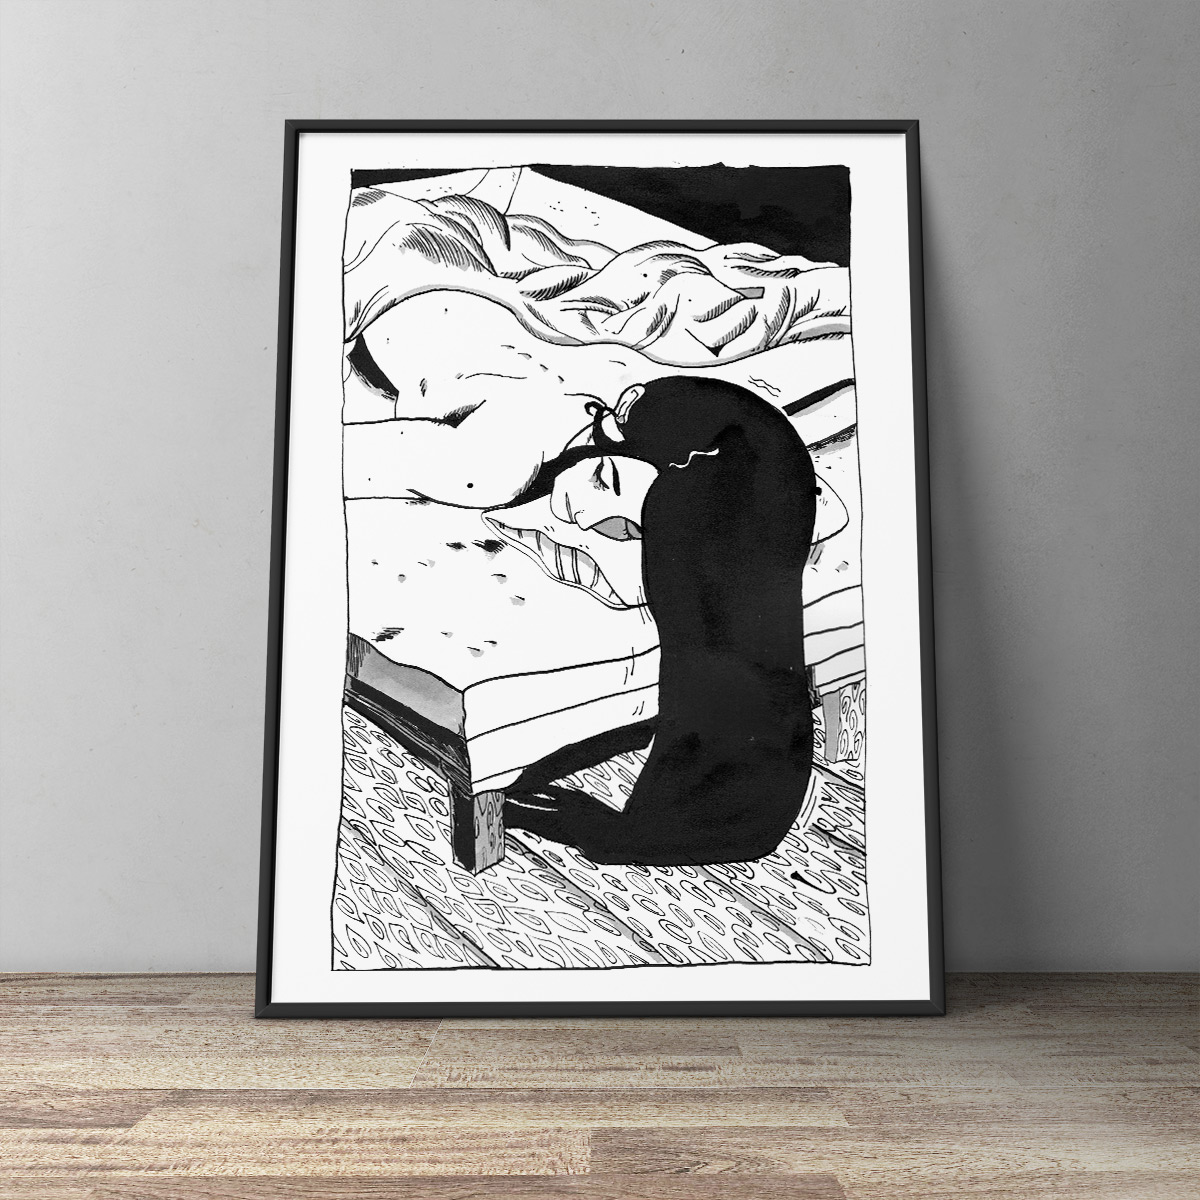 art-prints, gliceé, aesthetic, illustrative, monochrome, portraiture, bodies, everyday life, people, sexuality, black, white, ink, black-and-white, nude, Buy original high quality art. Paintings, drawings, limited edition prints & posters by talented artists.